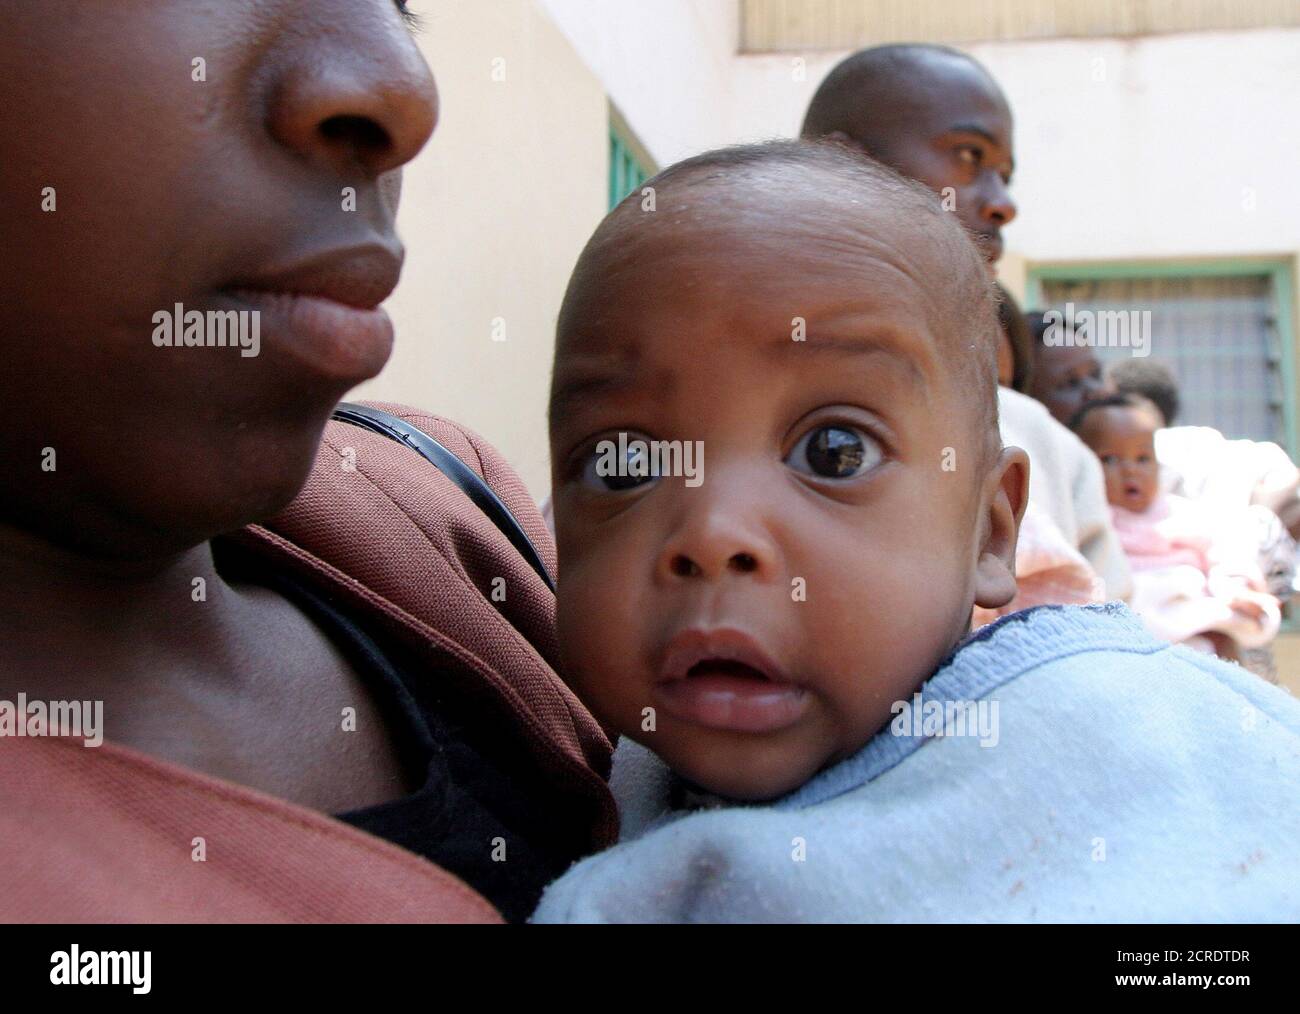 An unidentified child from a group of 20 children aged between five months and 12 years found by Kenyan authorities living with suspects of child trafficking, gazes at the camera outside Nairobi's Children home orphanage, September 6, 2004. The country started extradition proceedings on child theft charges against the British-based Kenyan pastor Gilbert Deya who says he can make infertile women pregnant. REUTERS/Thomas Mukoya  TM/RSS Stock Photo